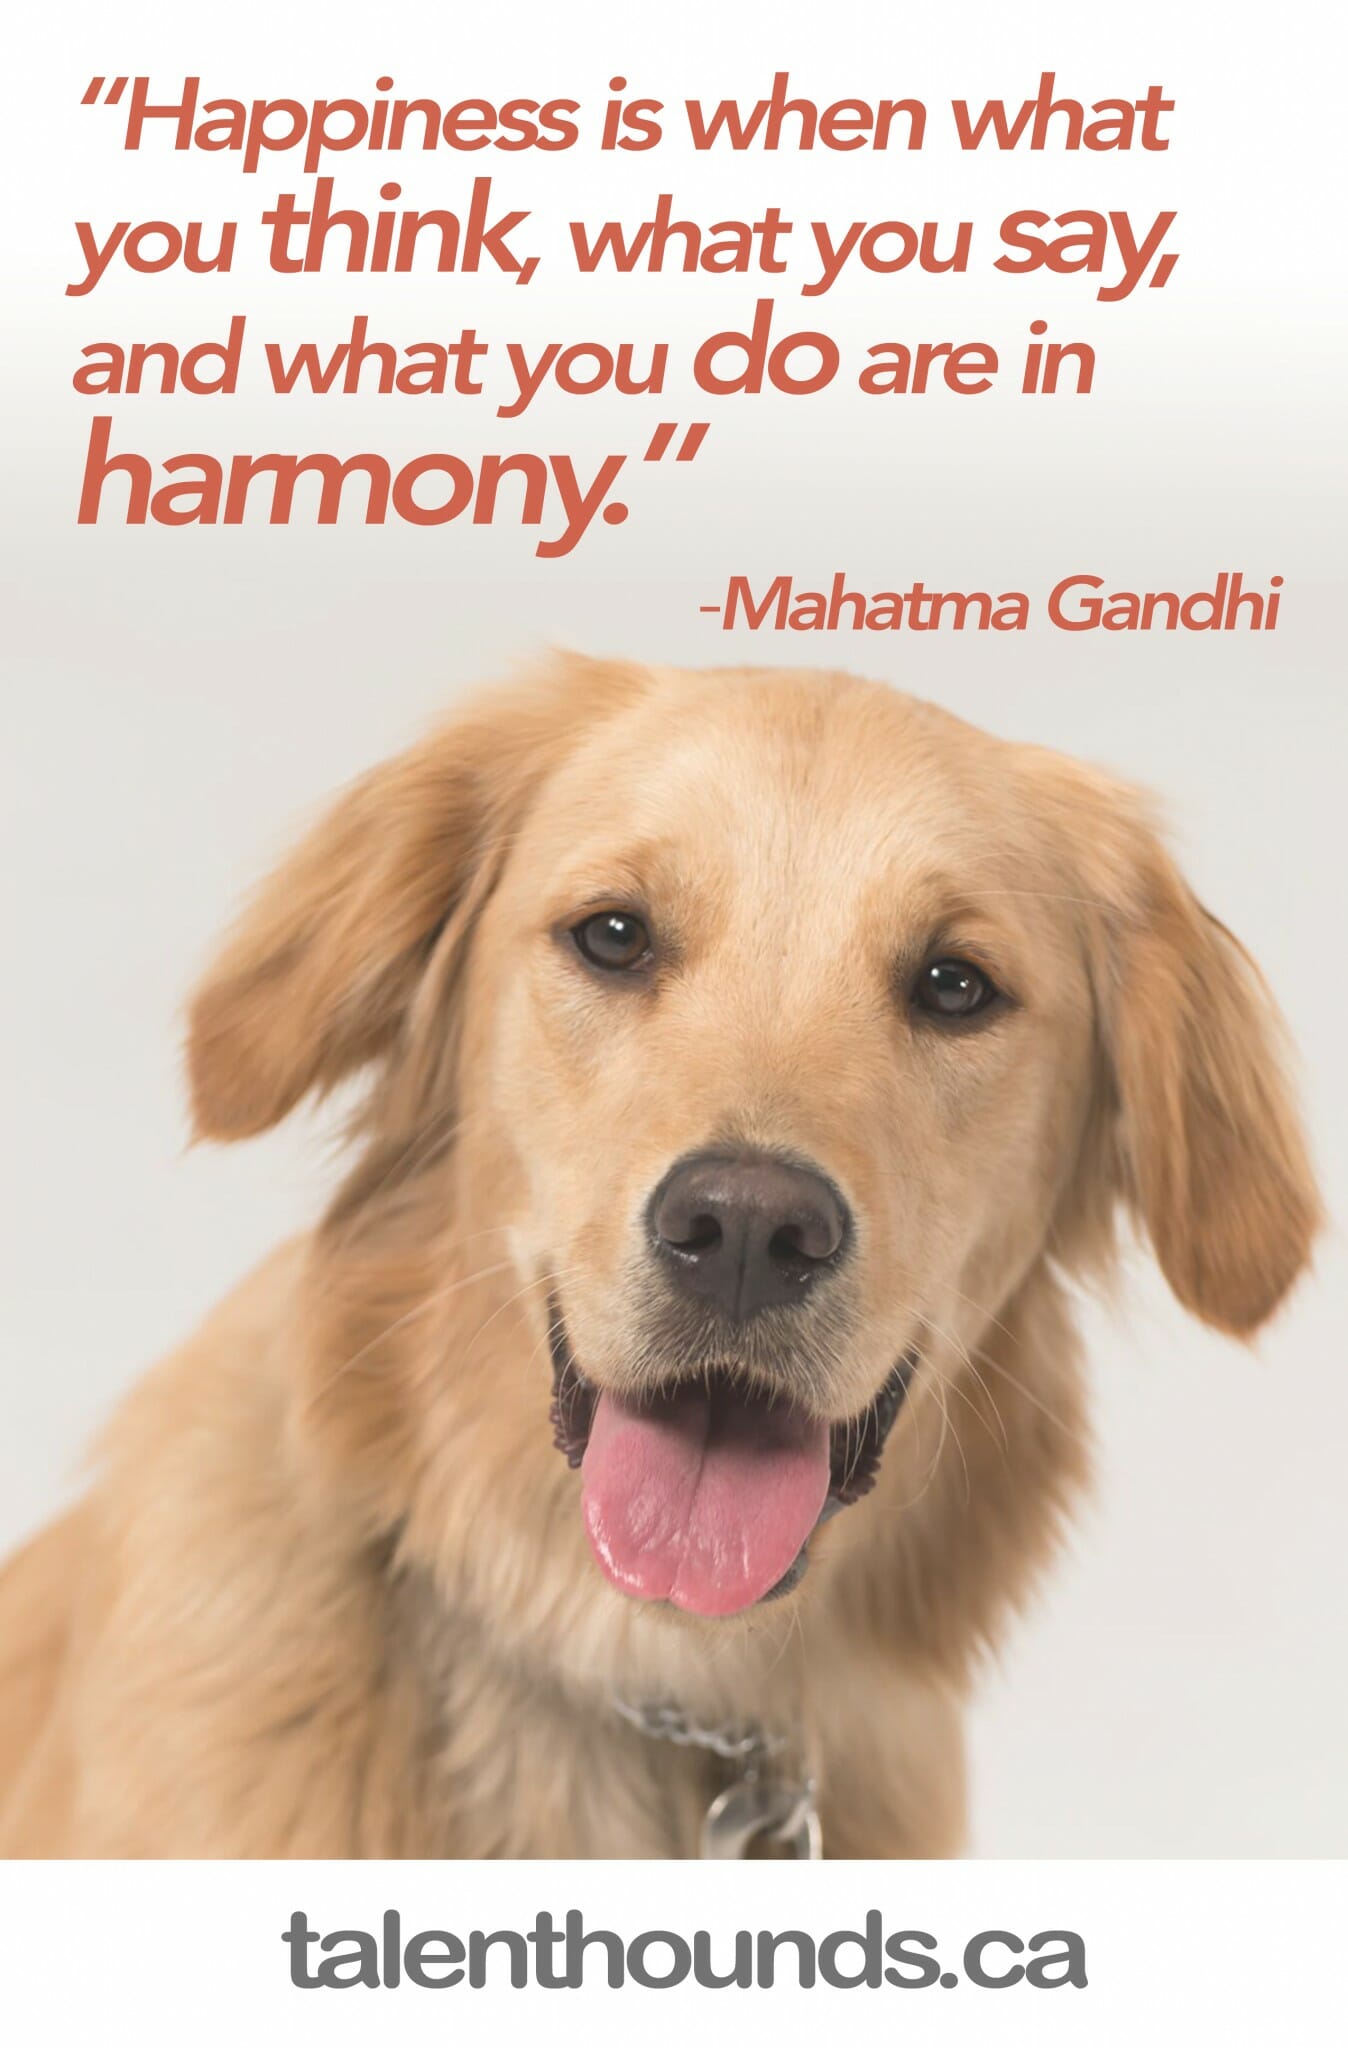 Enjoy this inspirational Happiness Quote by Mahatma Gandhi "Happiness is when what you think, what you say and what you do are in harmony"